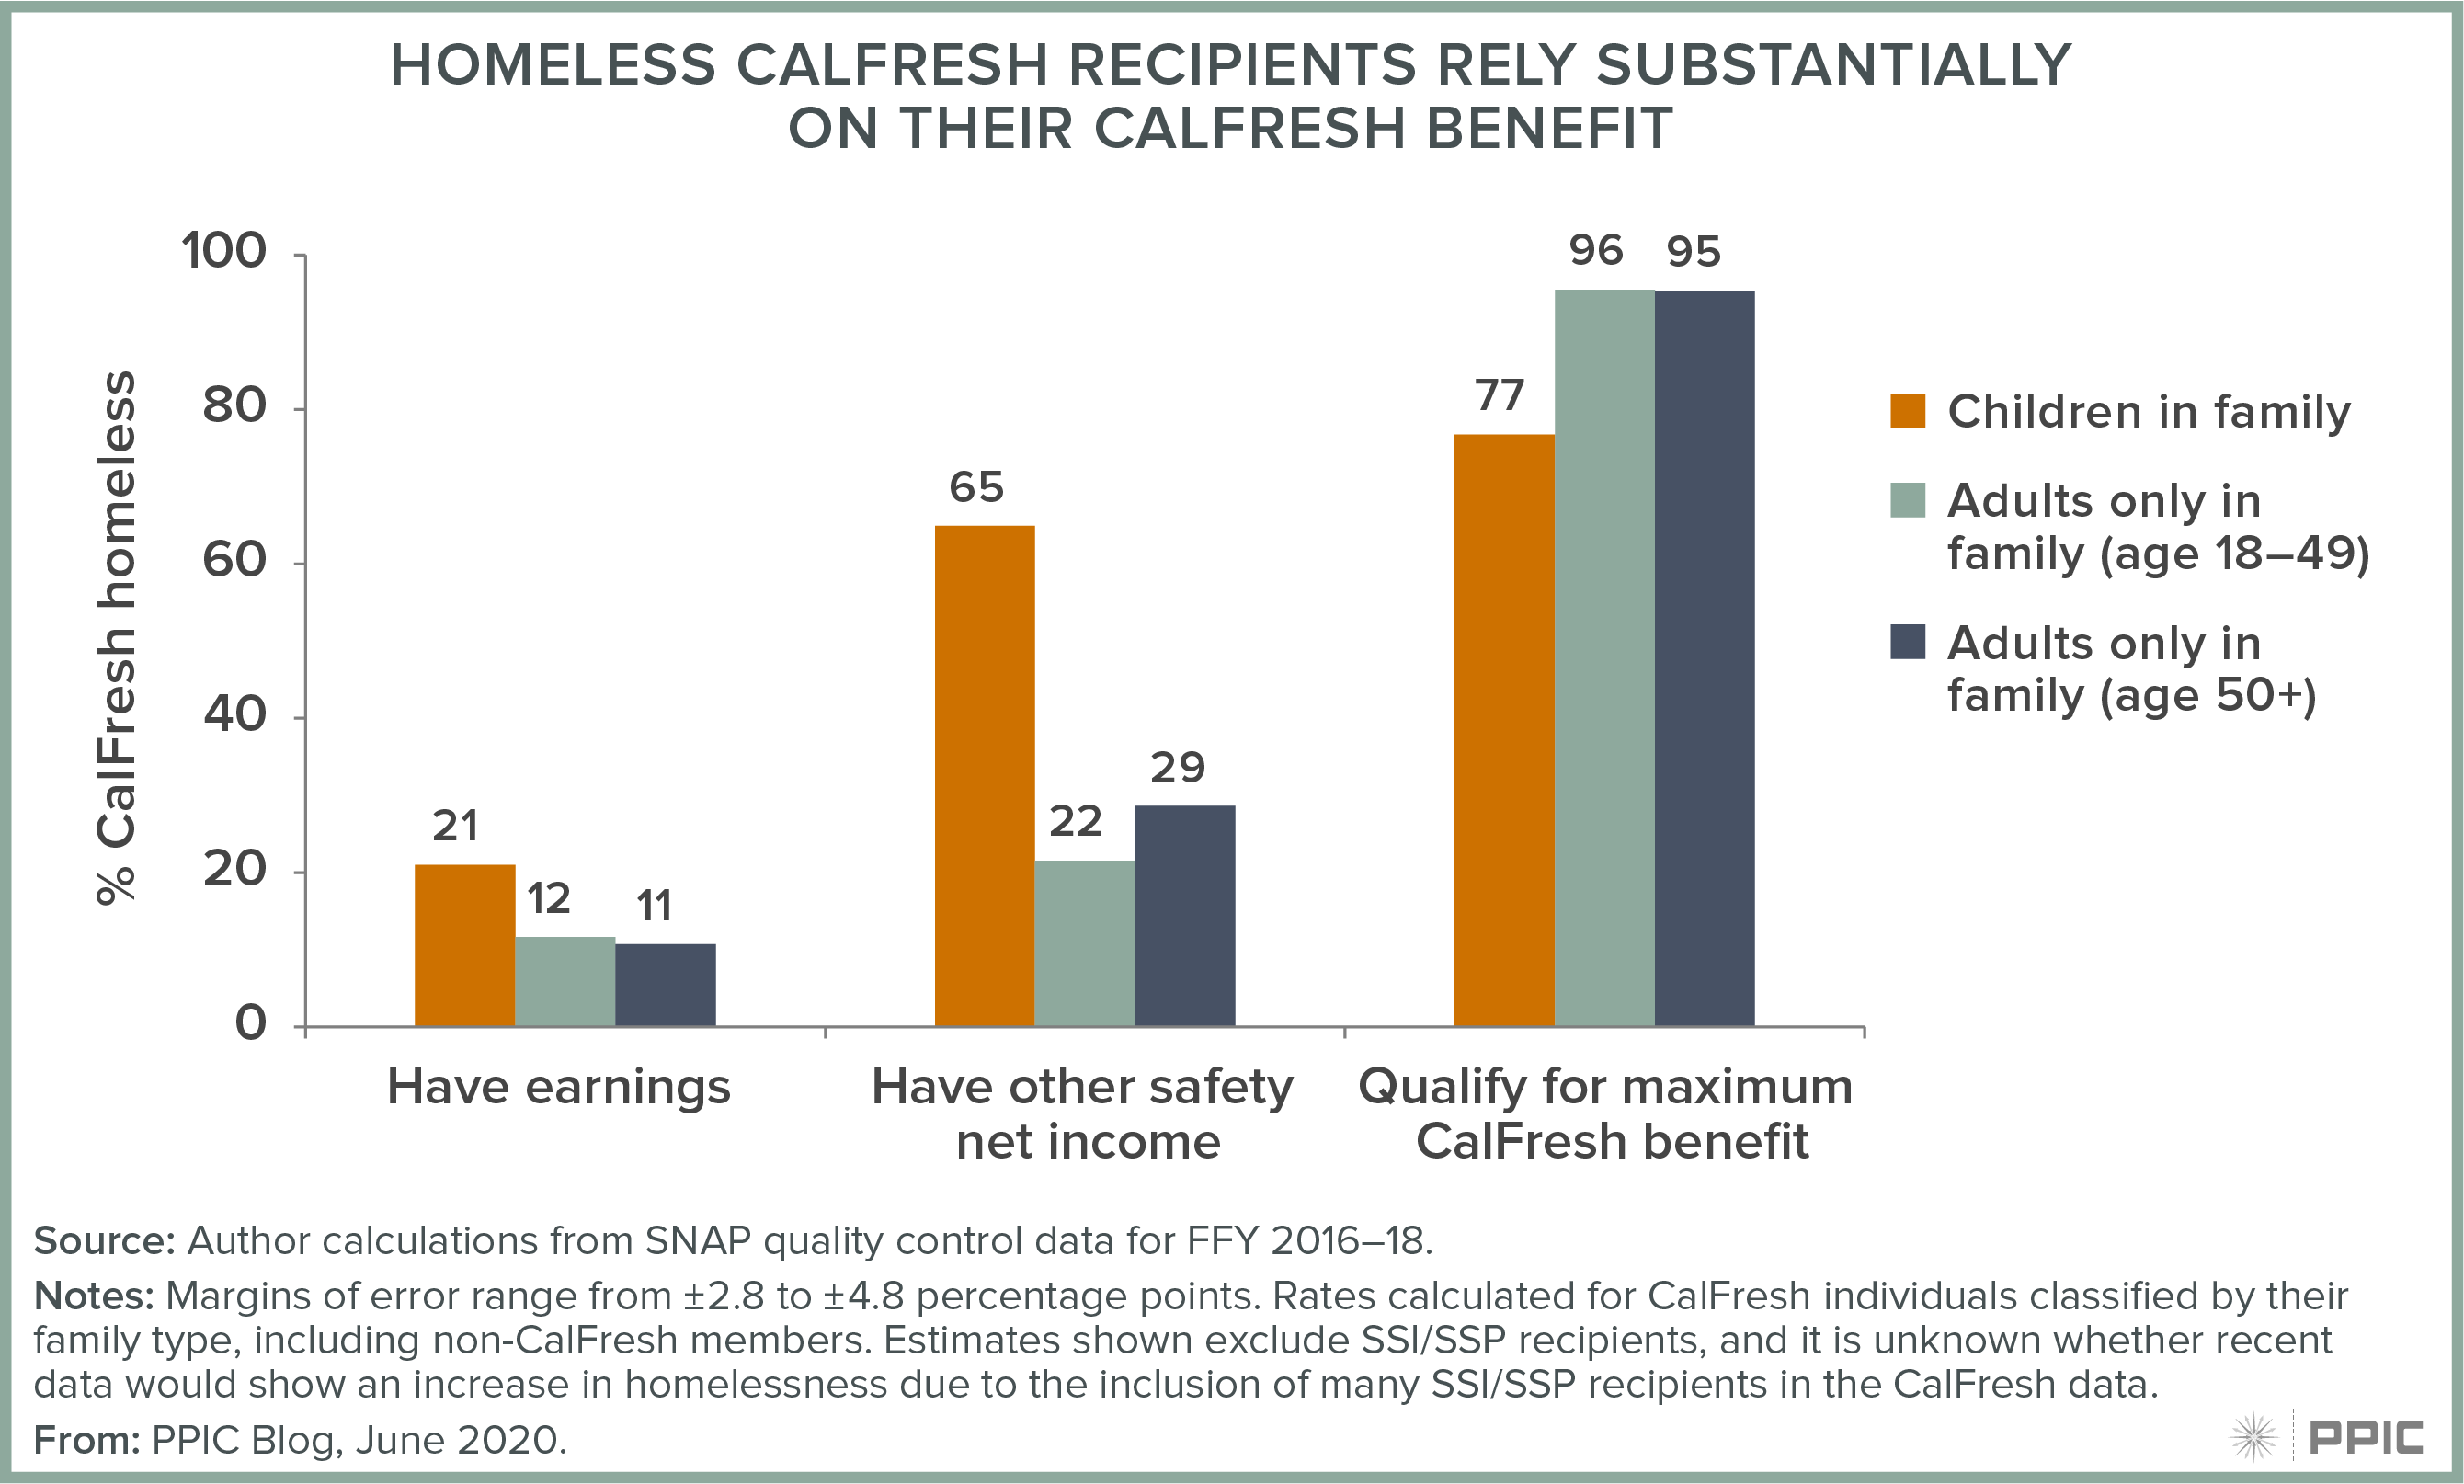 Figure - Homeless CalFresh Recipients Rely Substantially on Their CalFresh Benefit